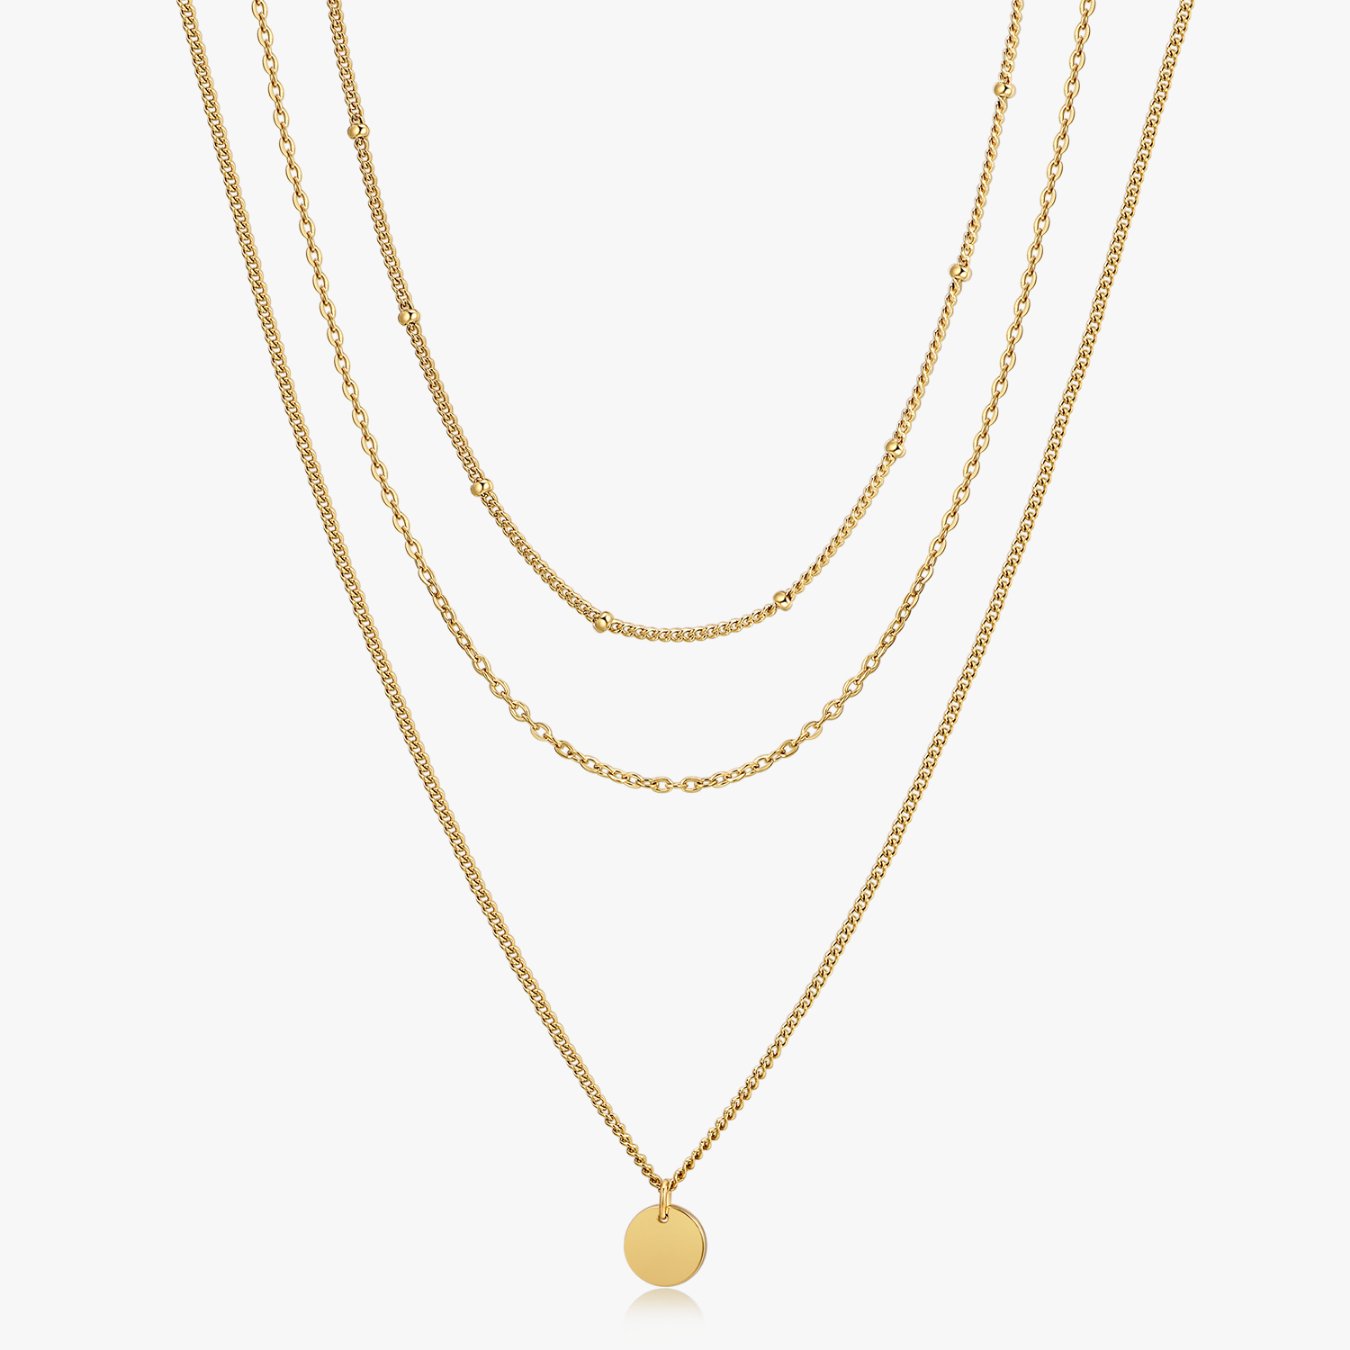 Triple Layered Necklace in Gold - Flaire & Co.